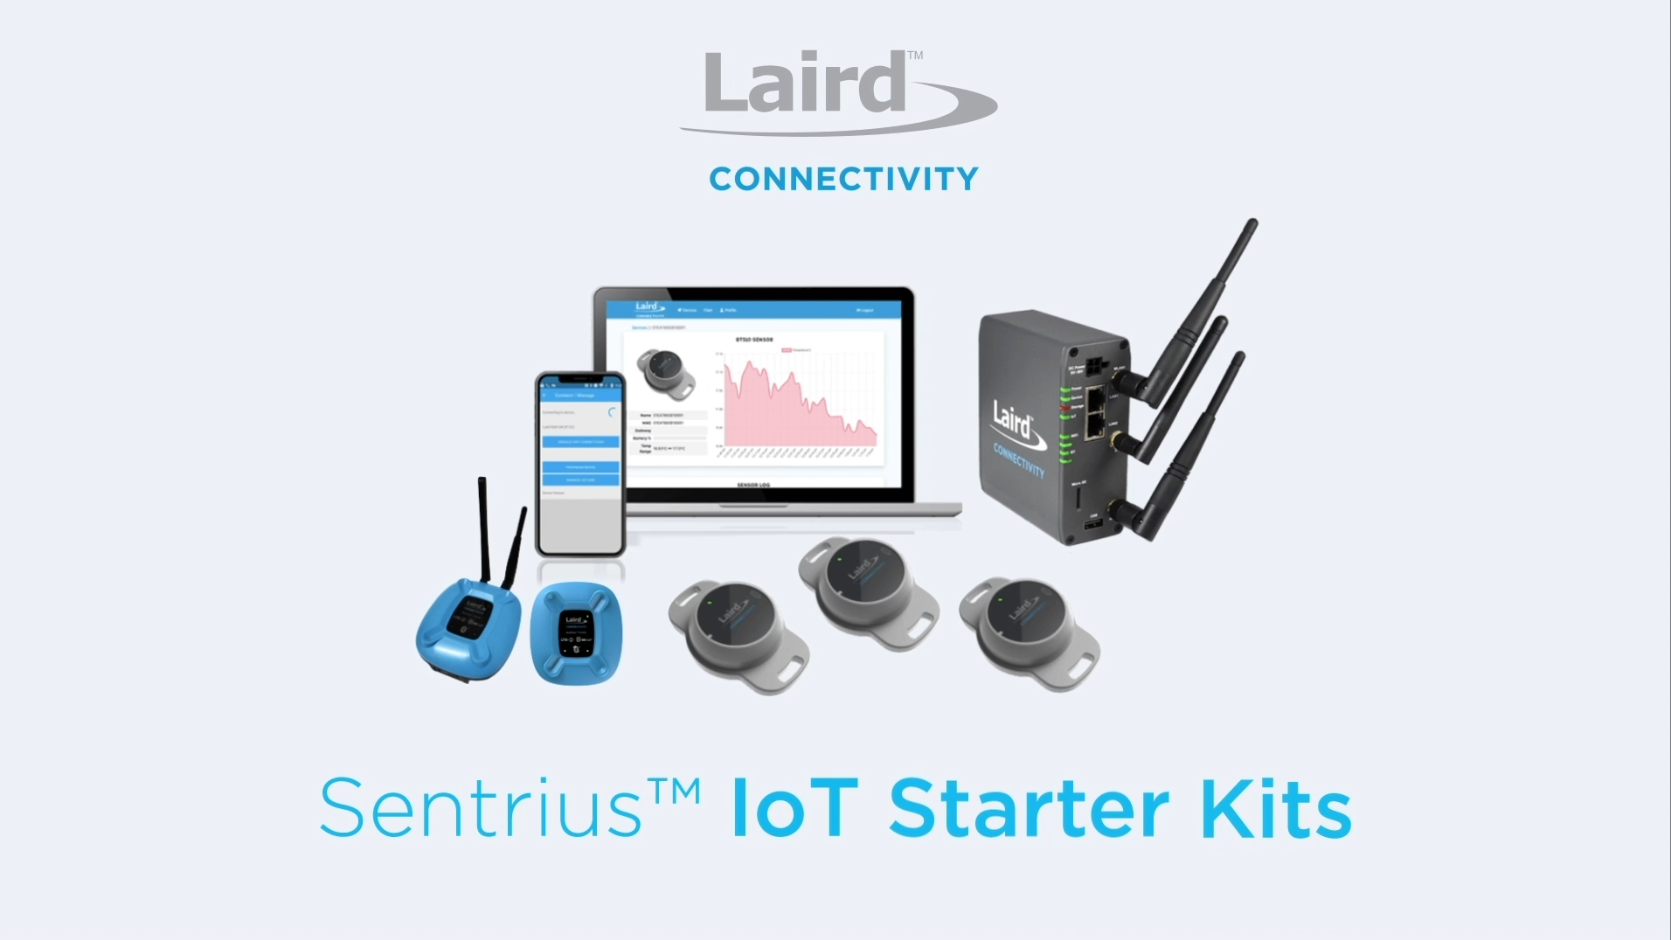 Introducing Our IoT Starter Kits